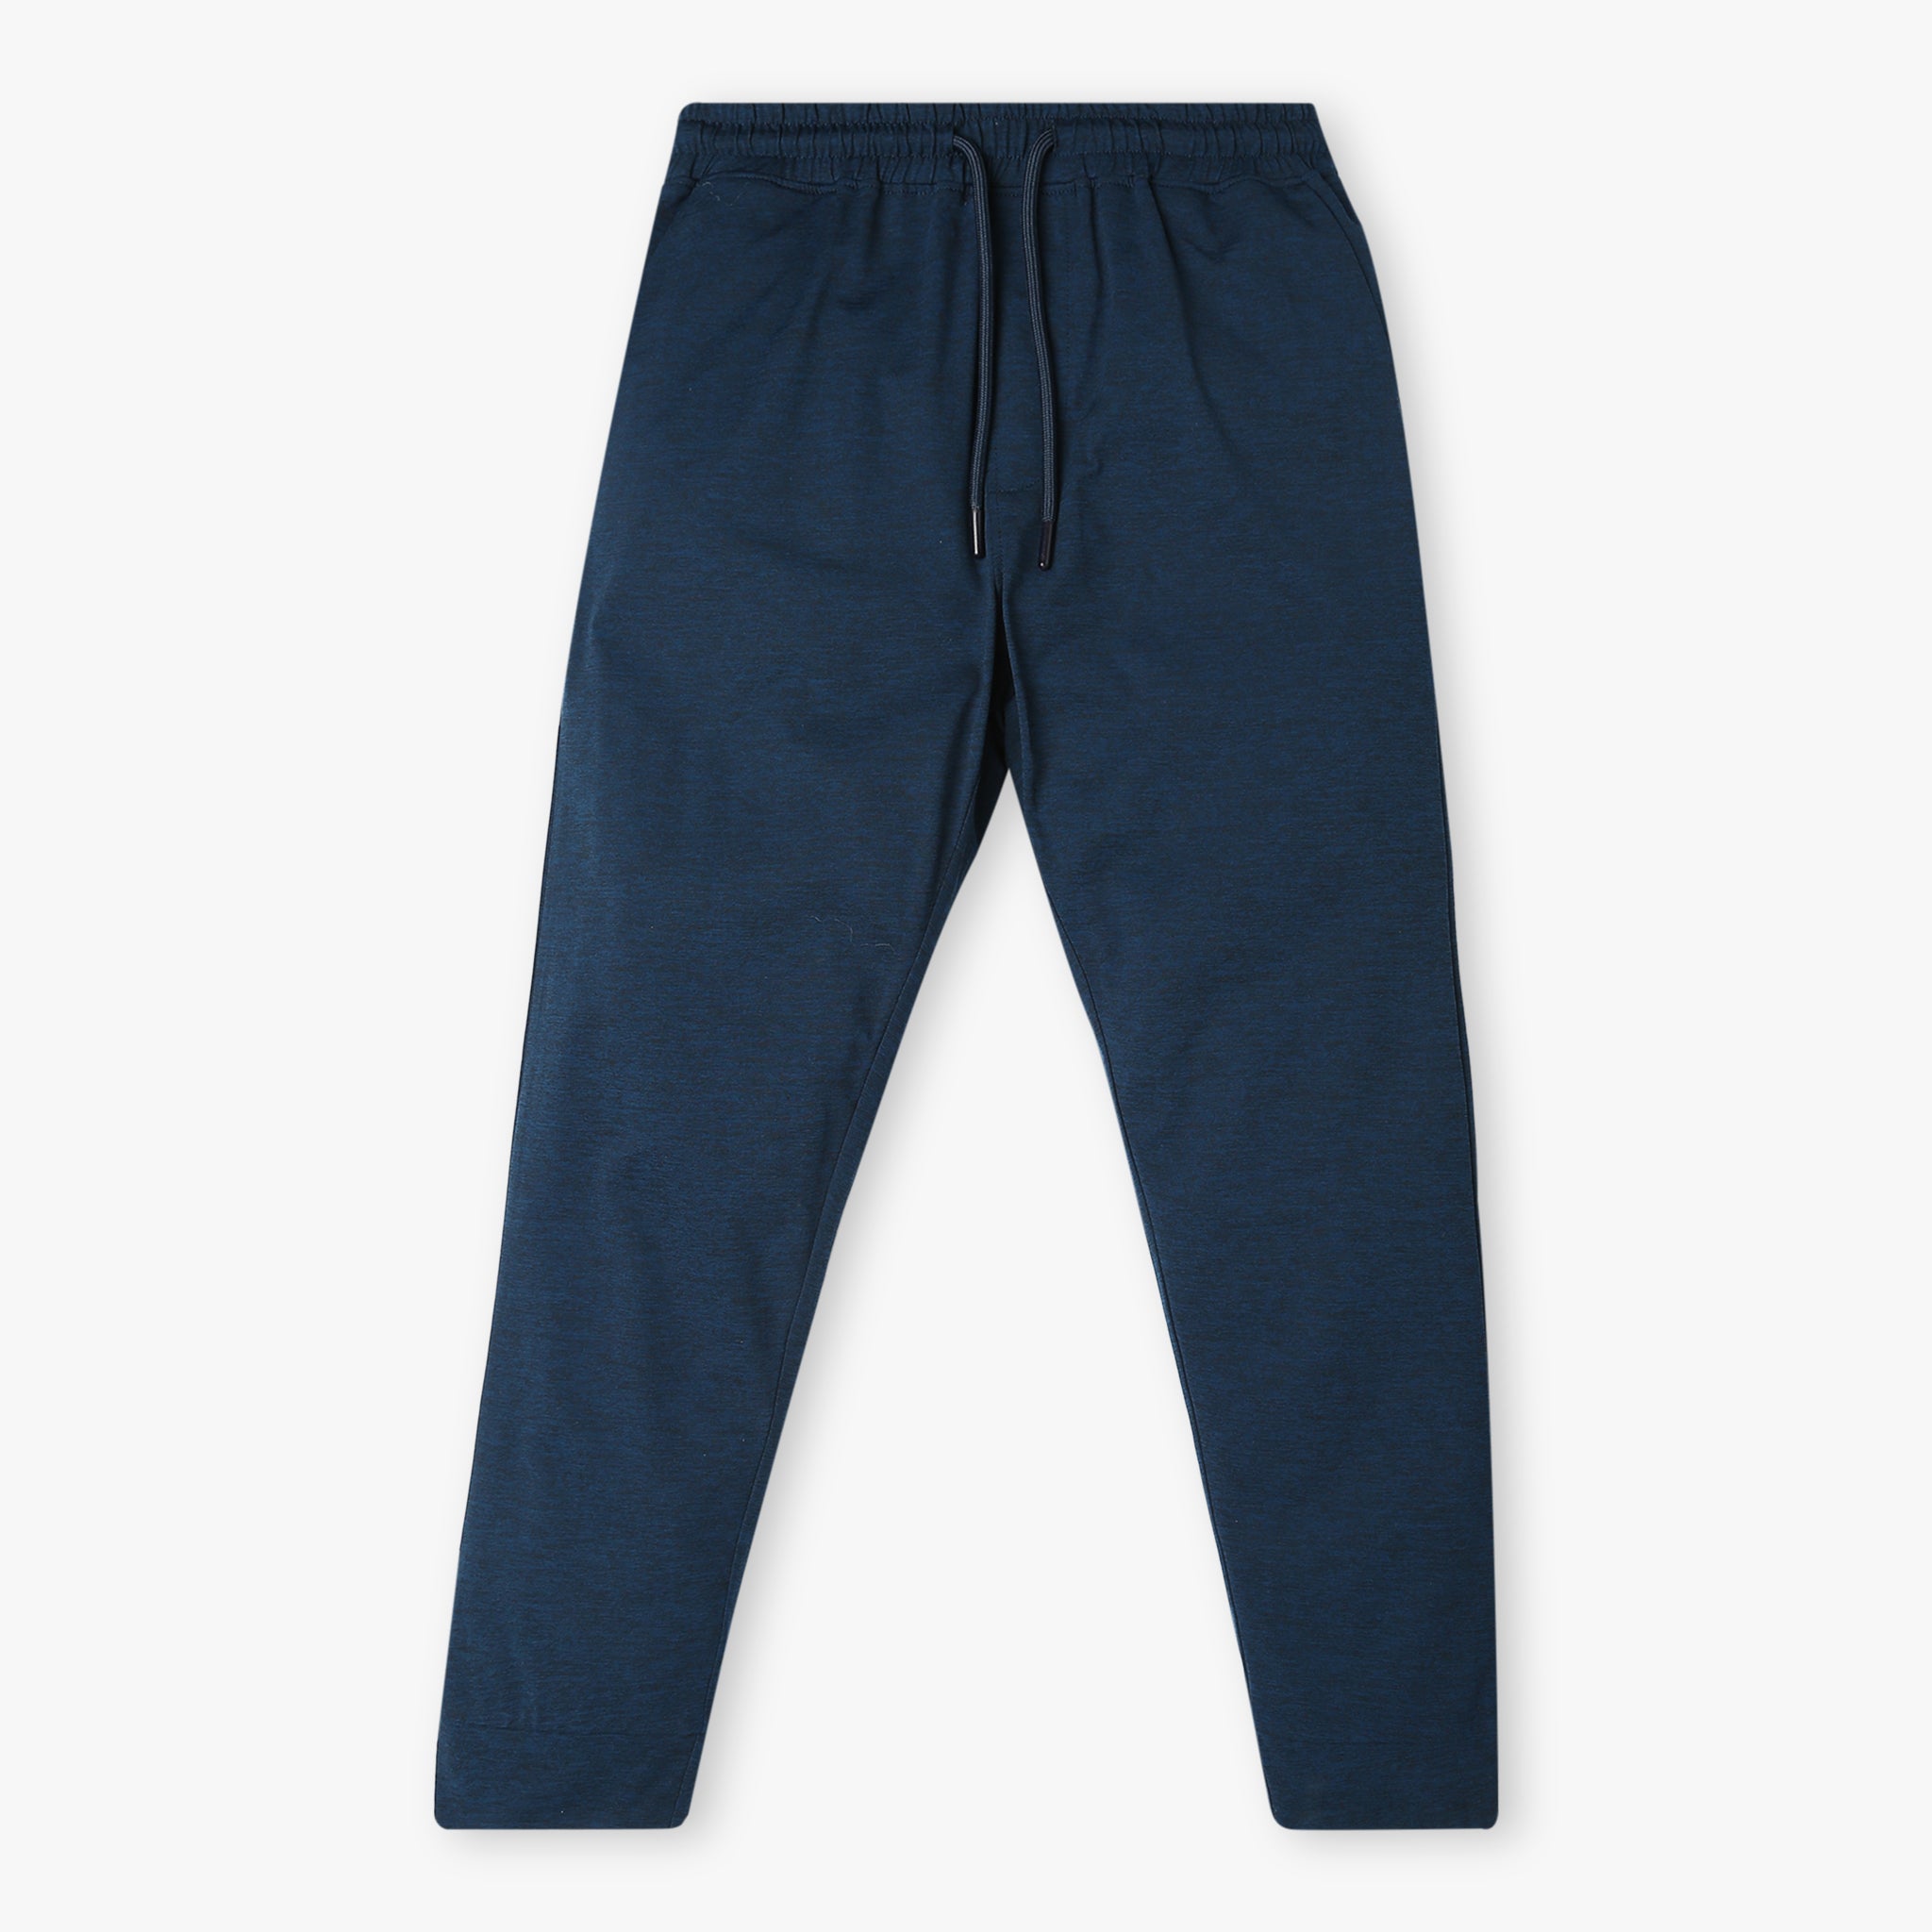 Basis Track Pant For Boys Price in India - Buy Basis Track Pant For Boys  online at Flipkart.com